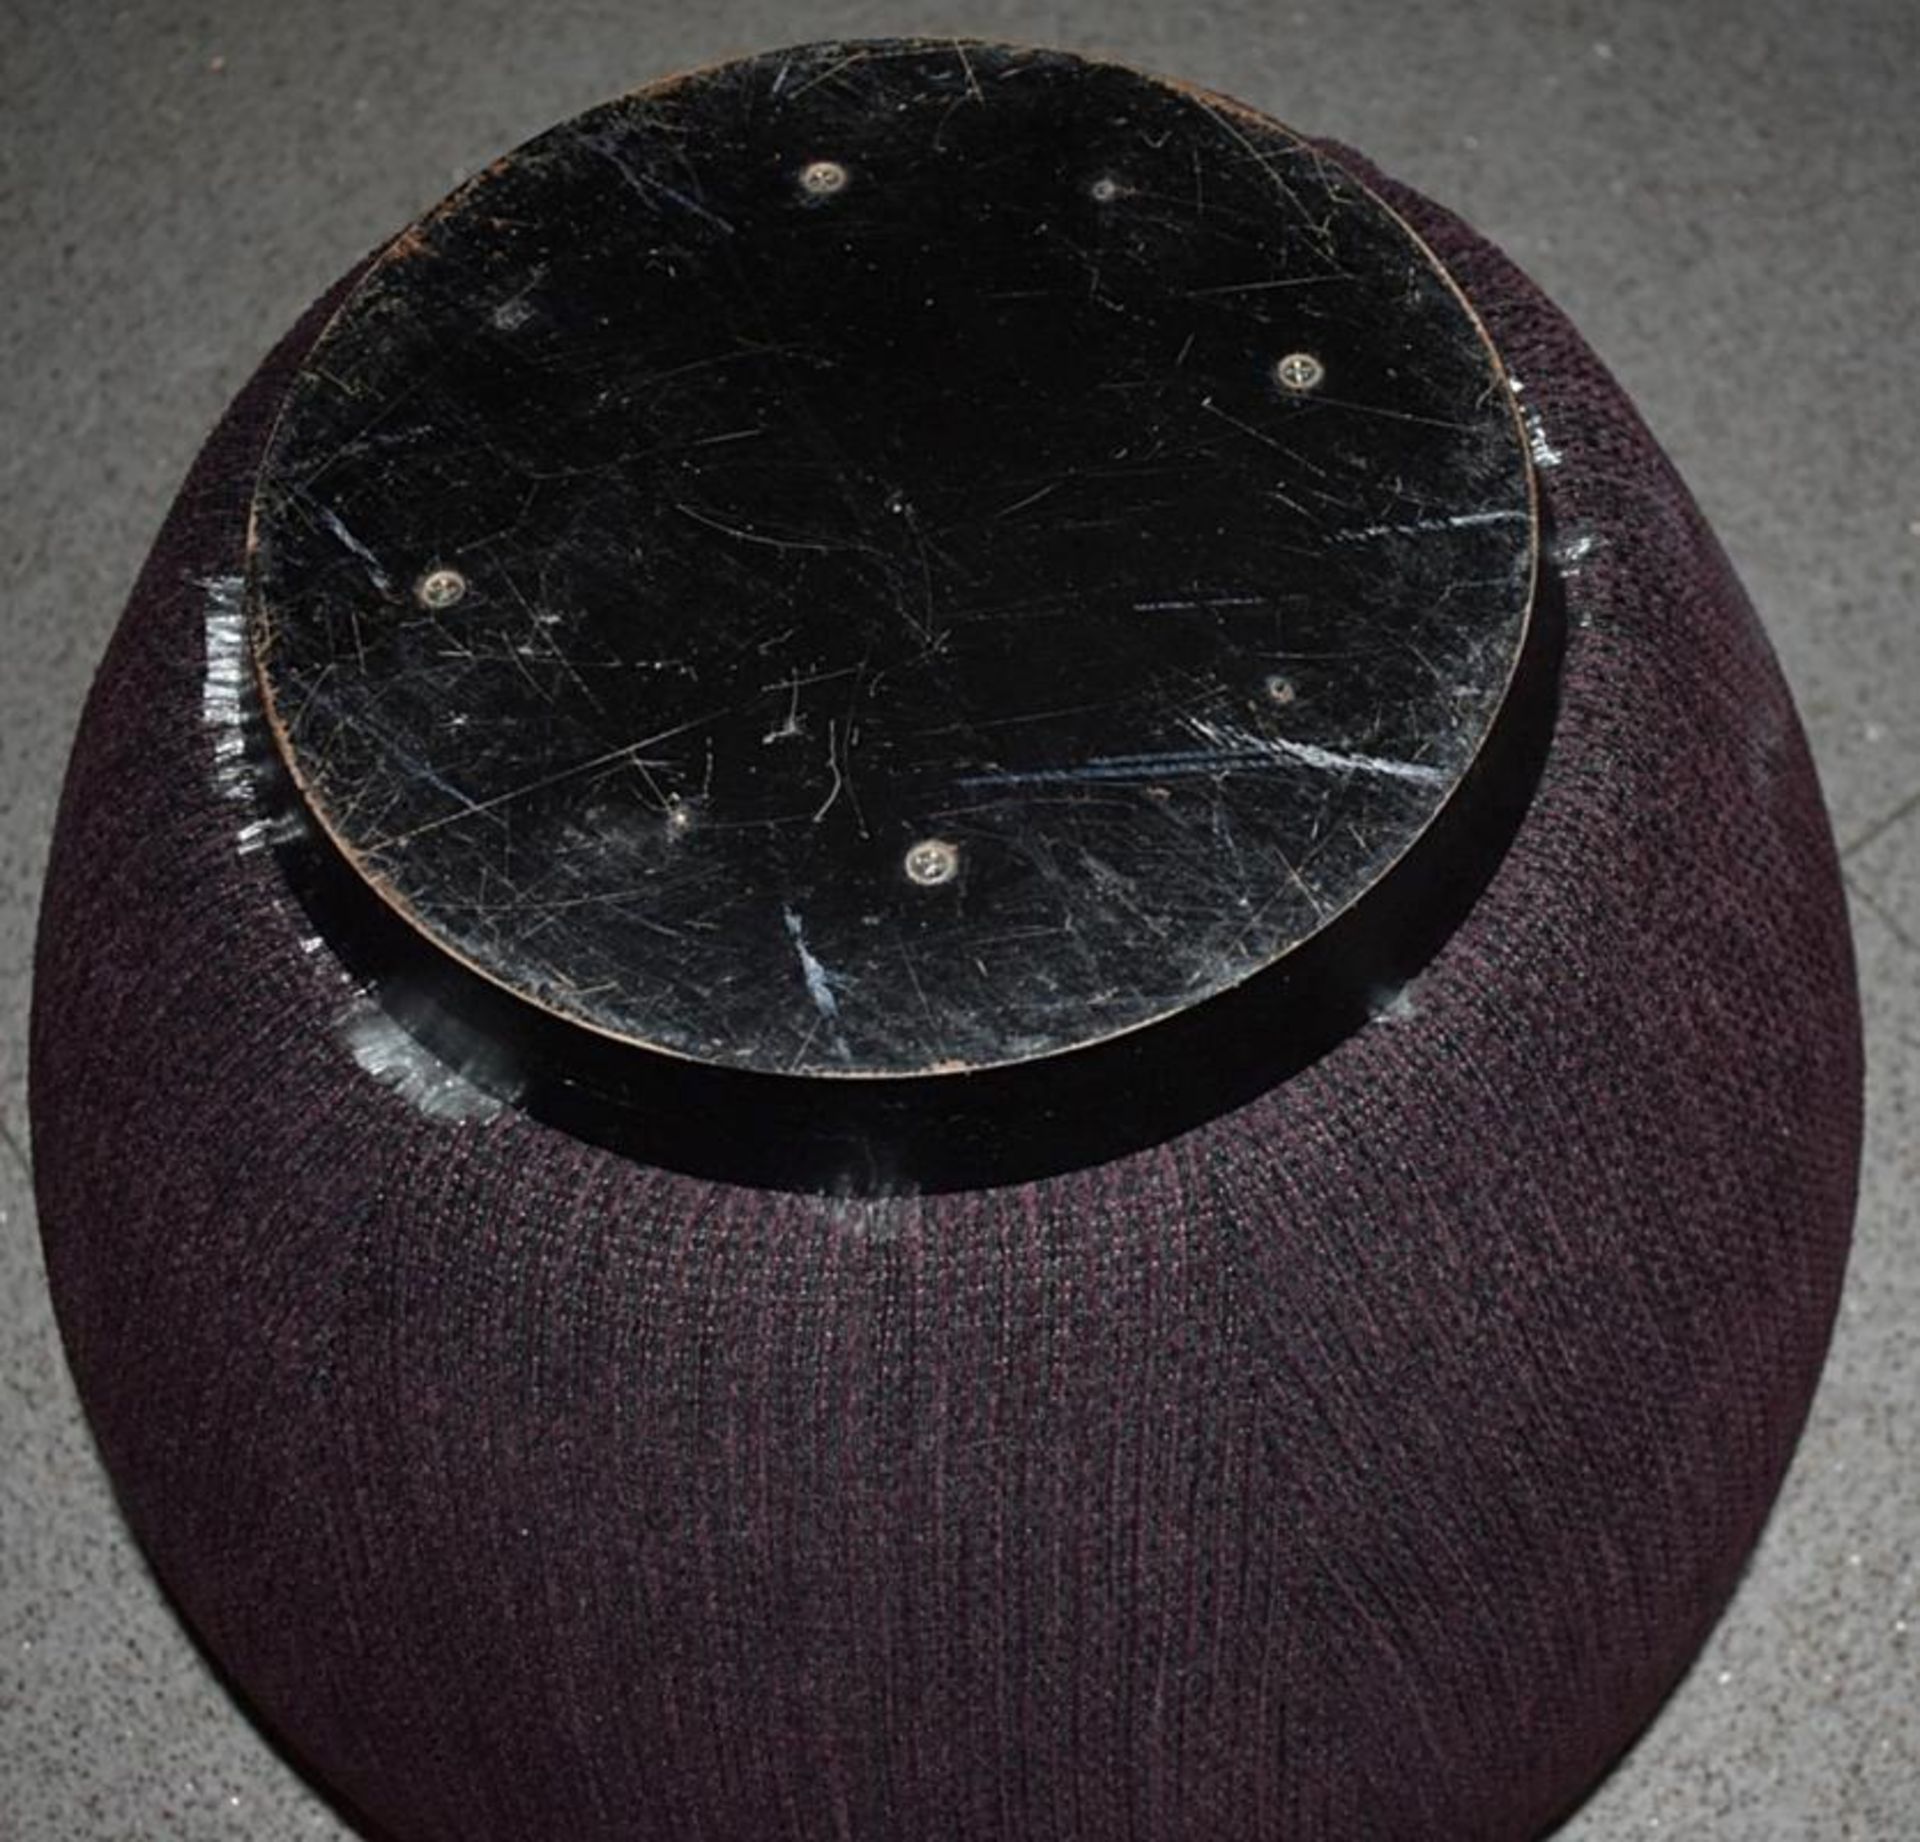 A Pair Of Chic Knitted Pouffes In A Dark Plum - Dimensions: Height 45 x Diameter 50cm - Ref: ABR029 - Image 3 of 3